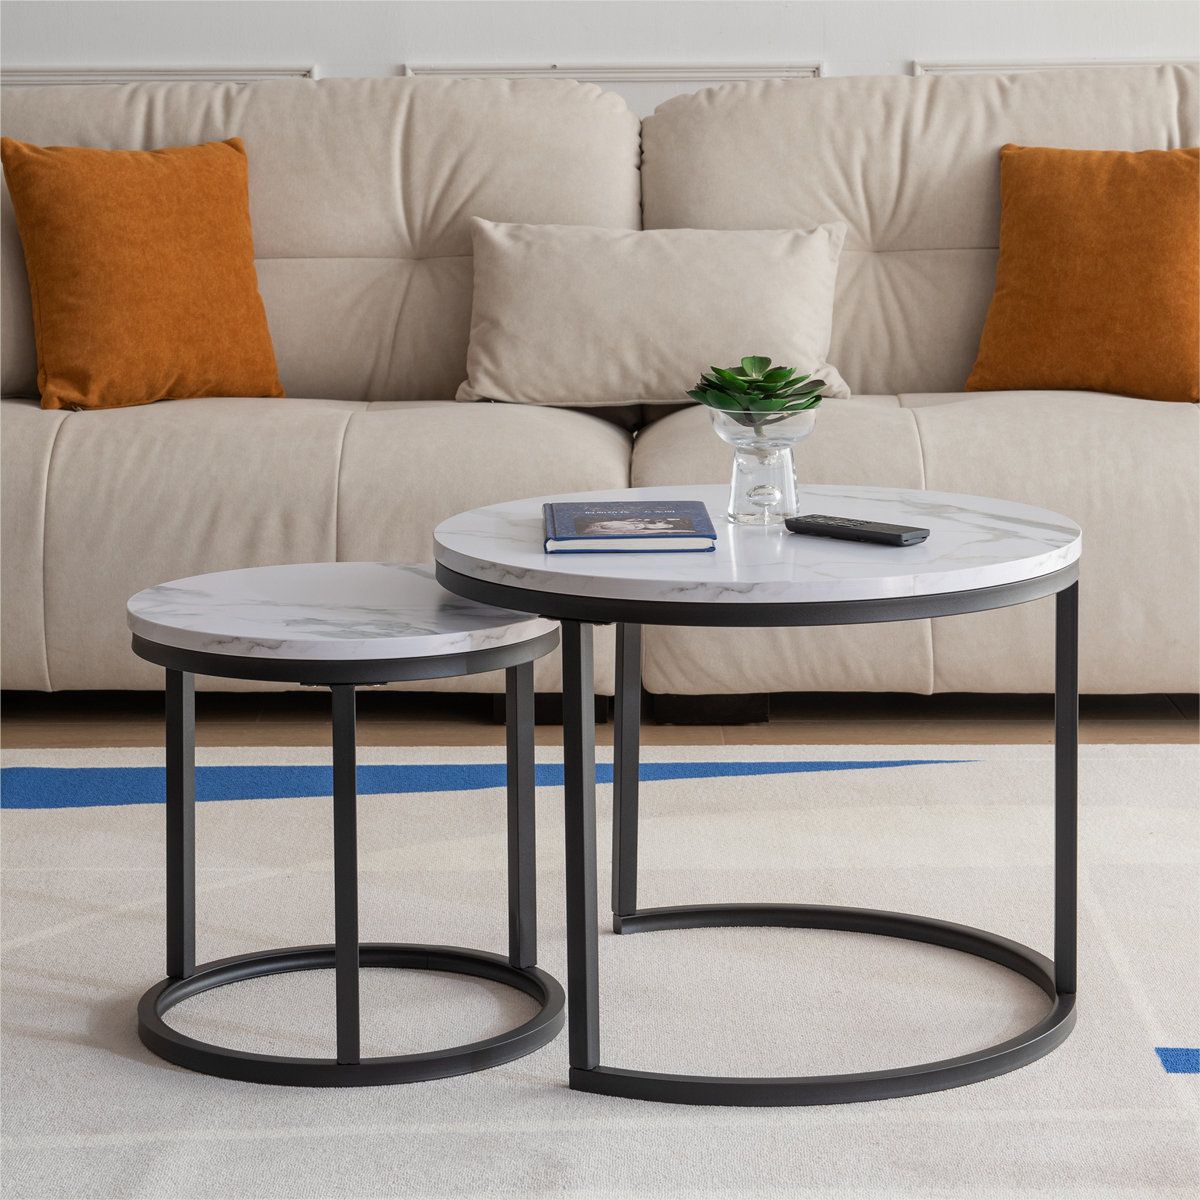 Wrought Studio Derell Nesting Coffee Table | Wayfair Regarding Modern Nesting Coffee Tables (View 7 of 15)